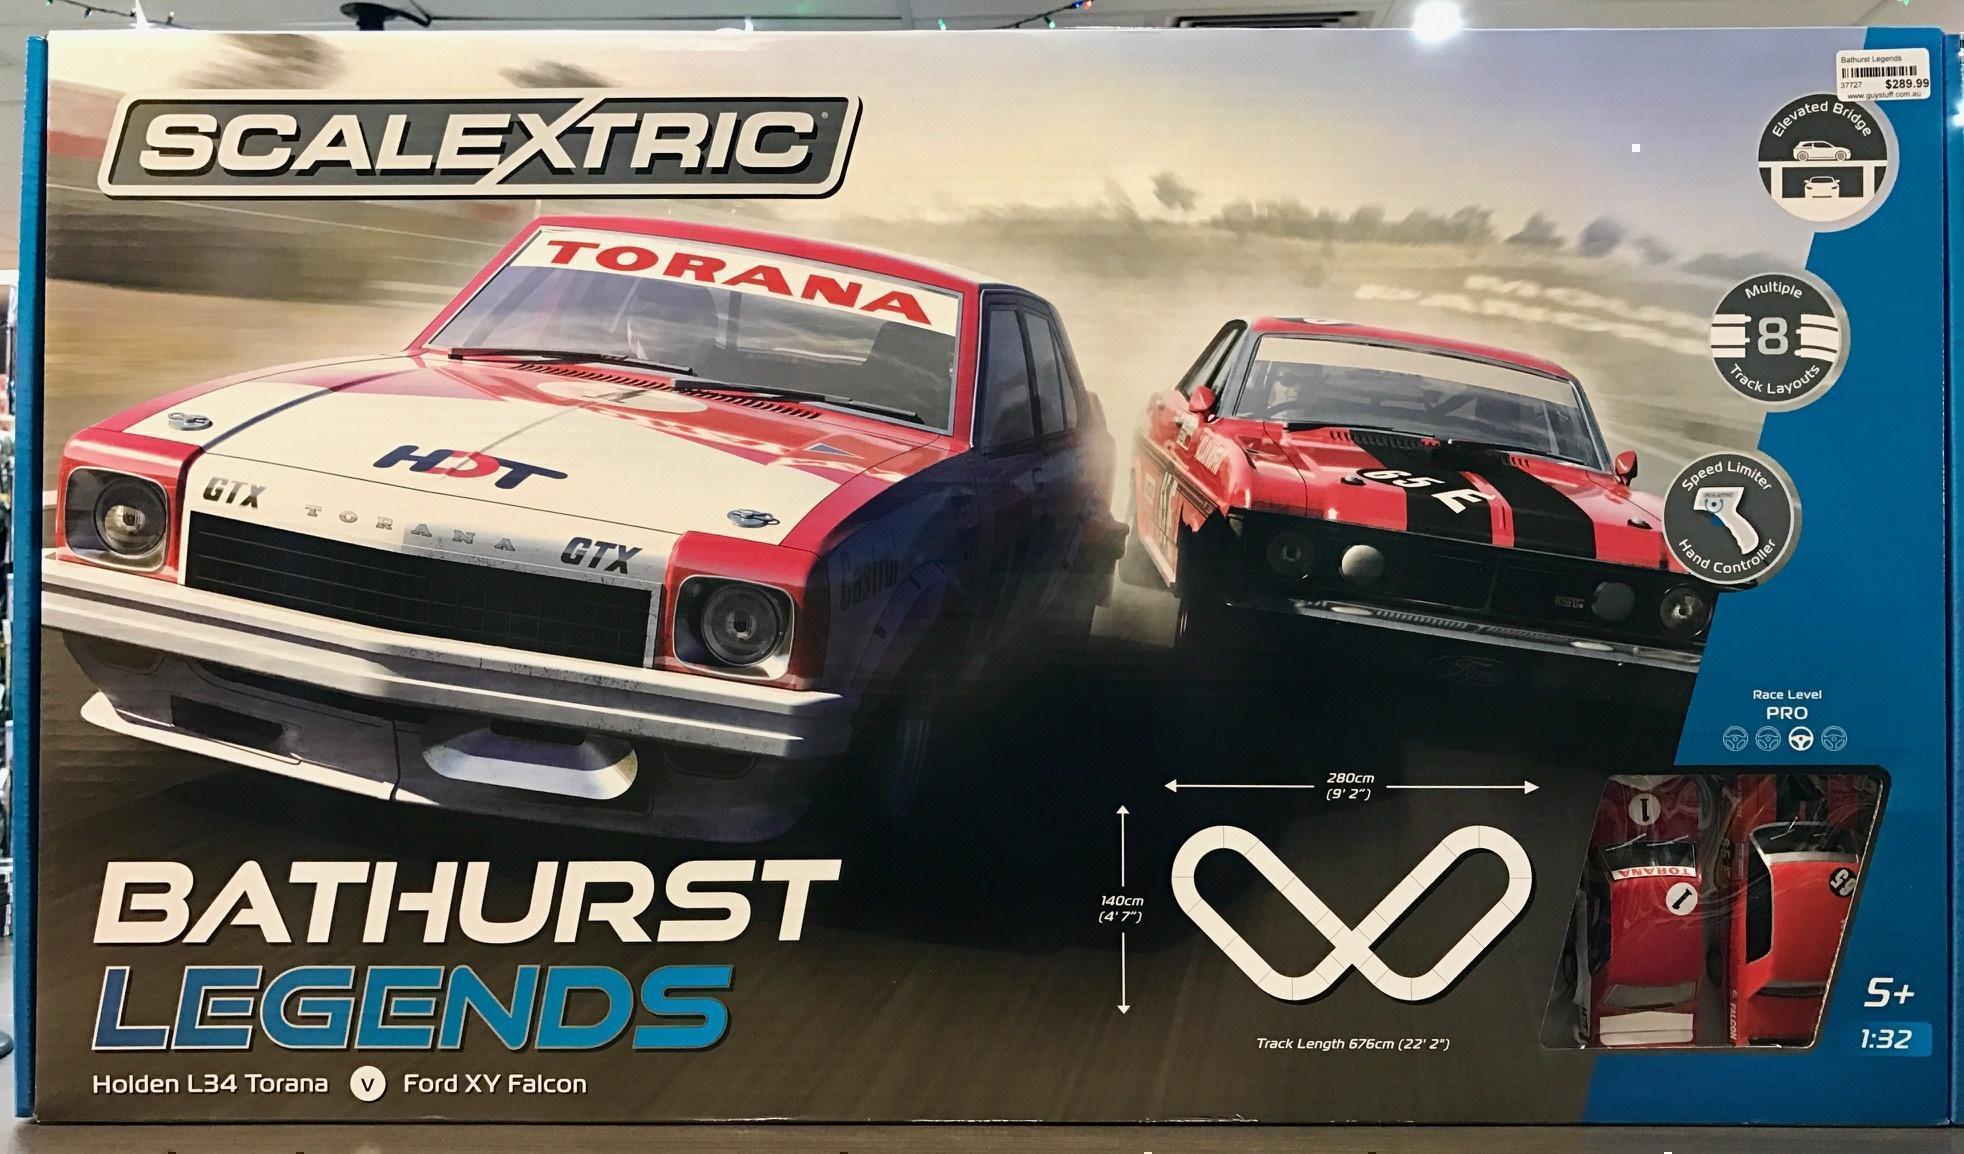 Bathurst Legends Holden L34 Torana v Ford XY Falcon Scalextric Set 1:32 Scale Track, Cars and Controller Included Model Slot Car